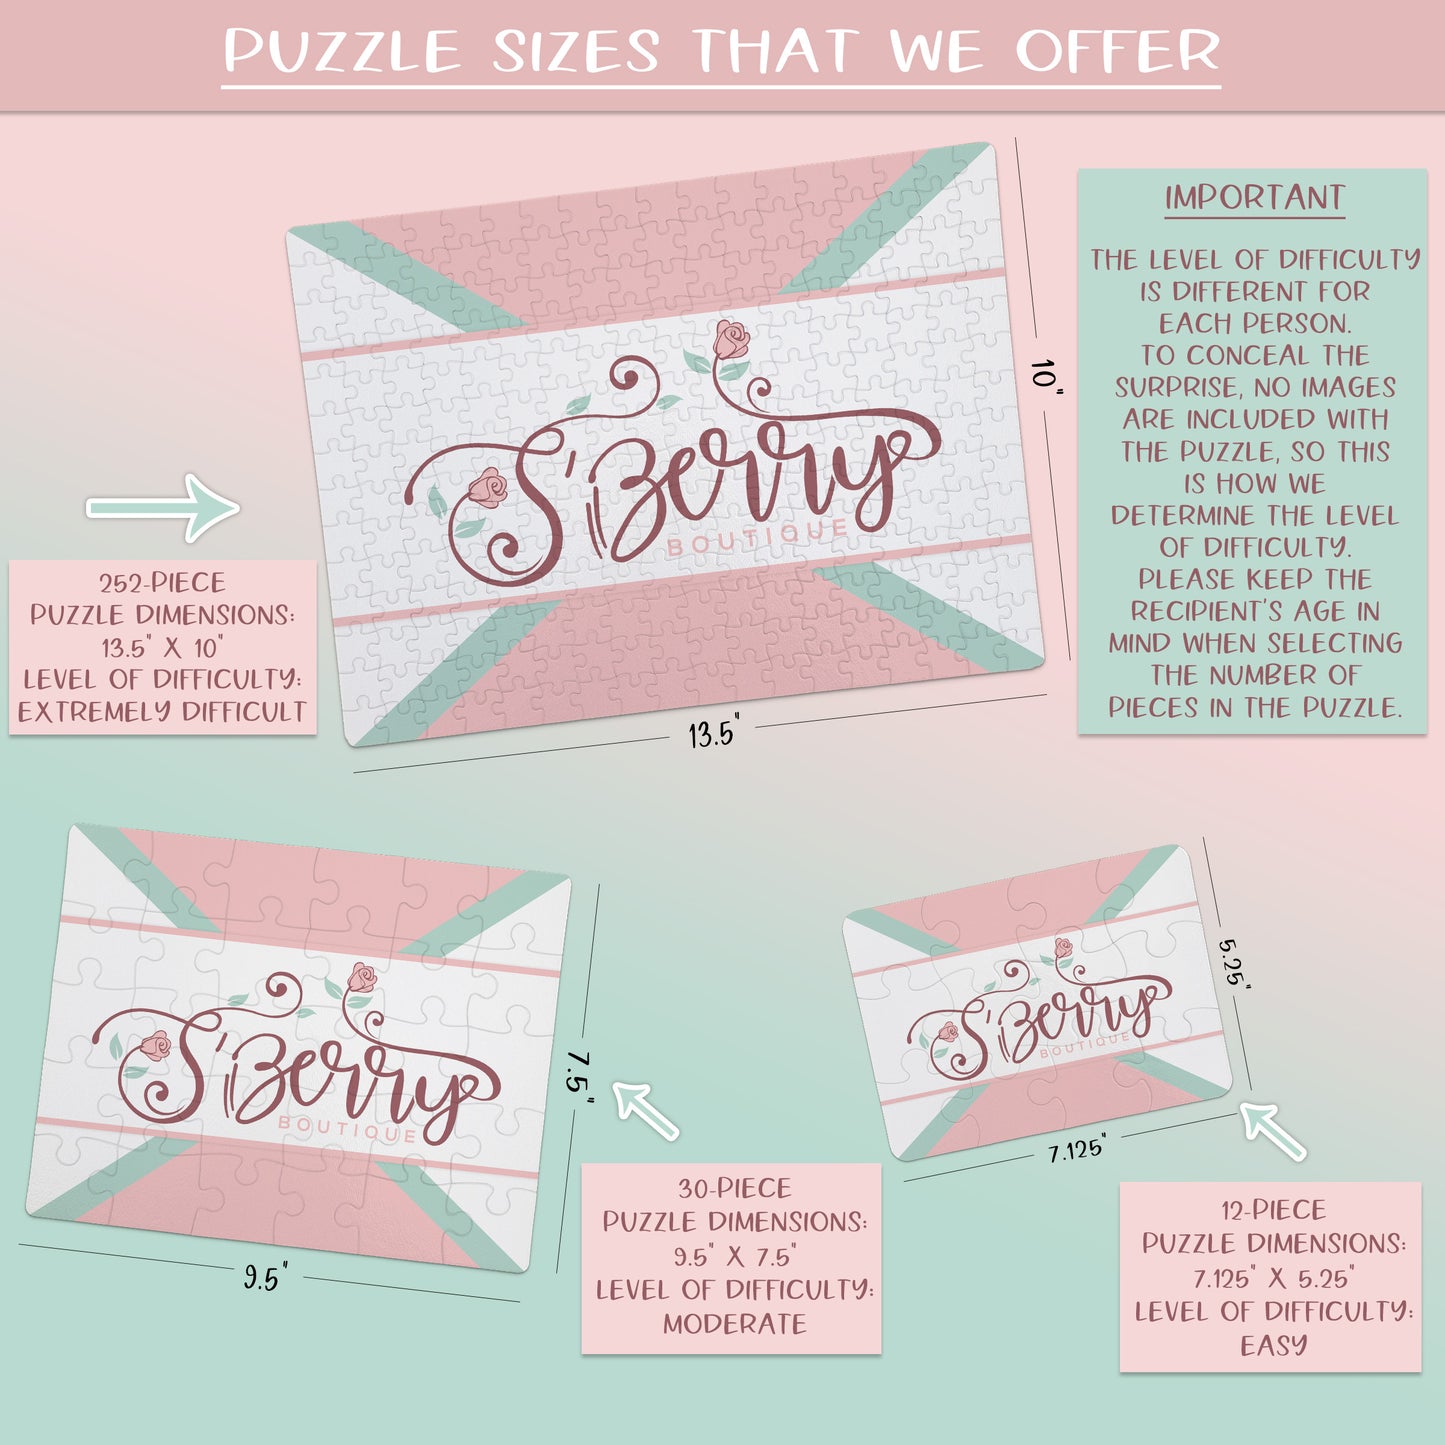 Create Your Own Puzzle - Arrow Design - CYOP0226 | S'Berry Boutique